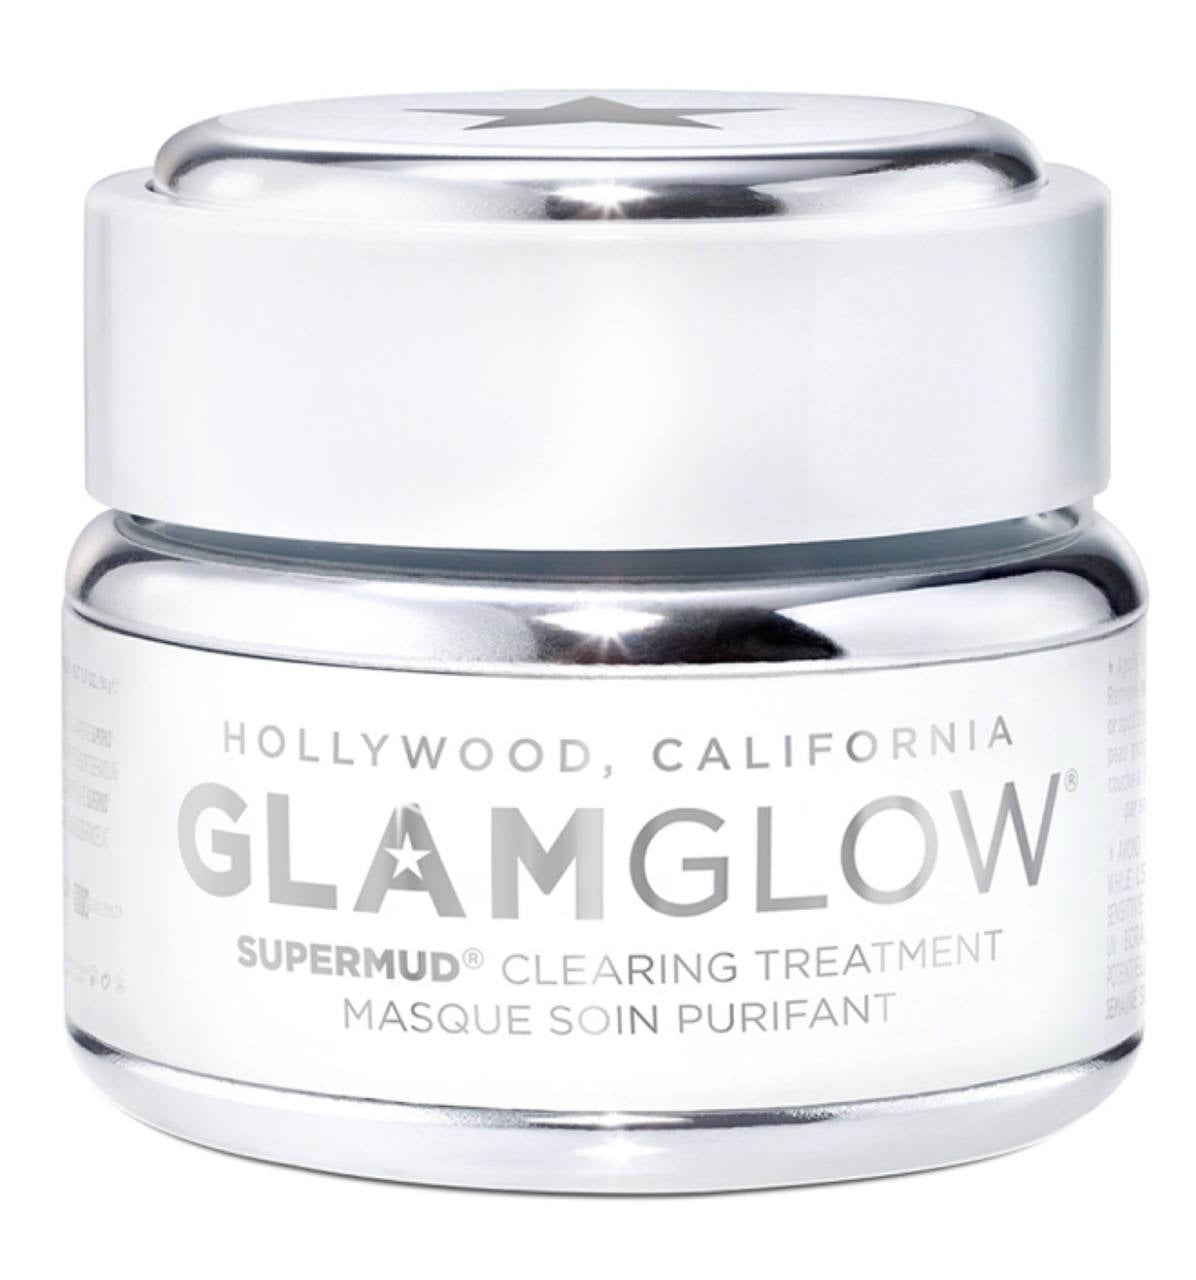 Glam glow  clearing treatment